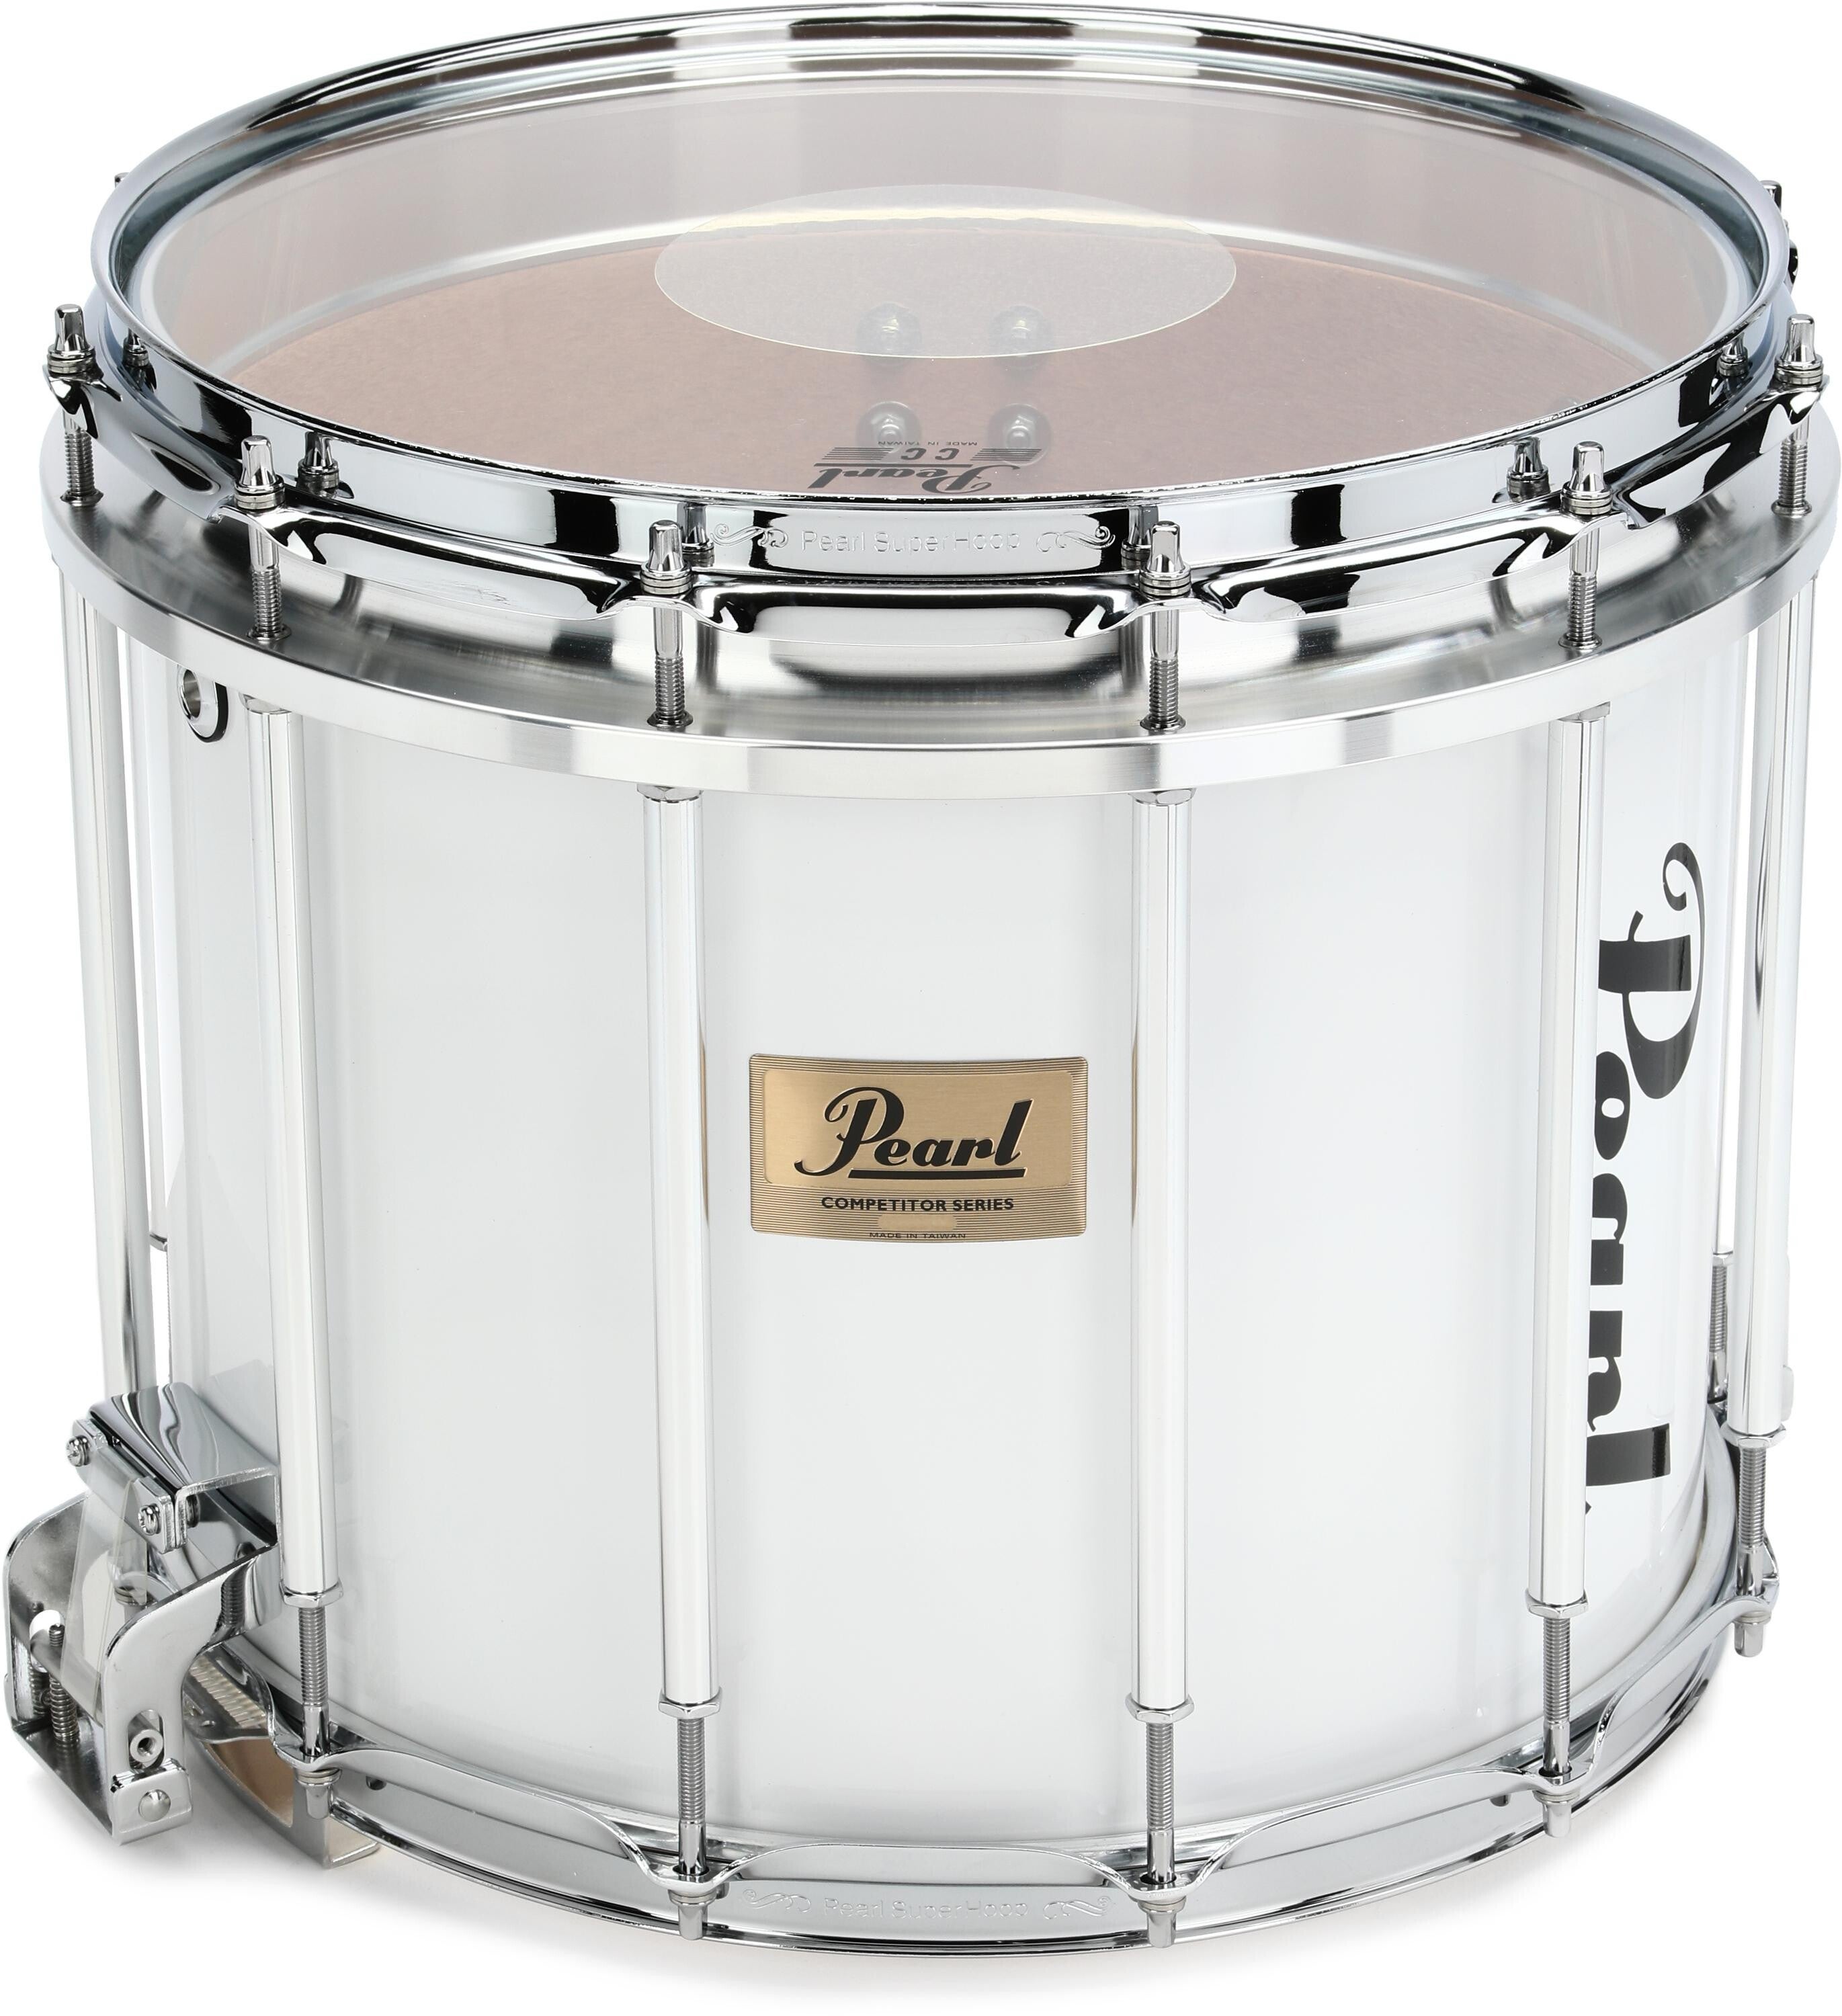 Pearl Competitor CMSX Marching Snare Drum - 14 x 12 inch - Pure